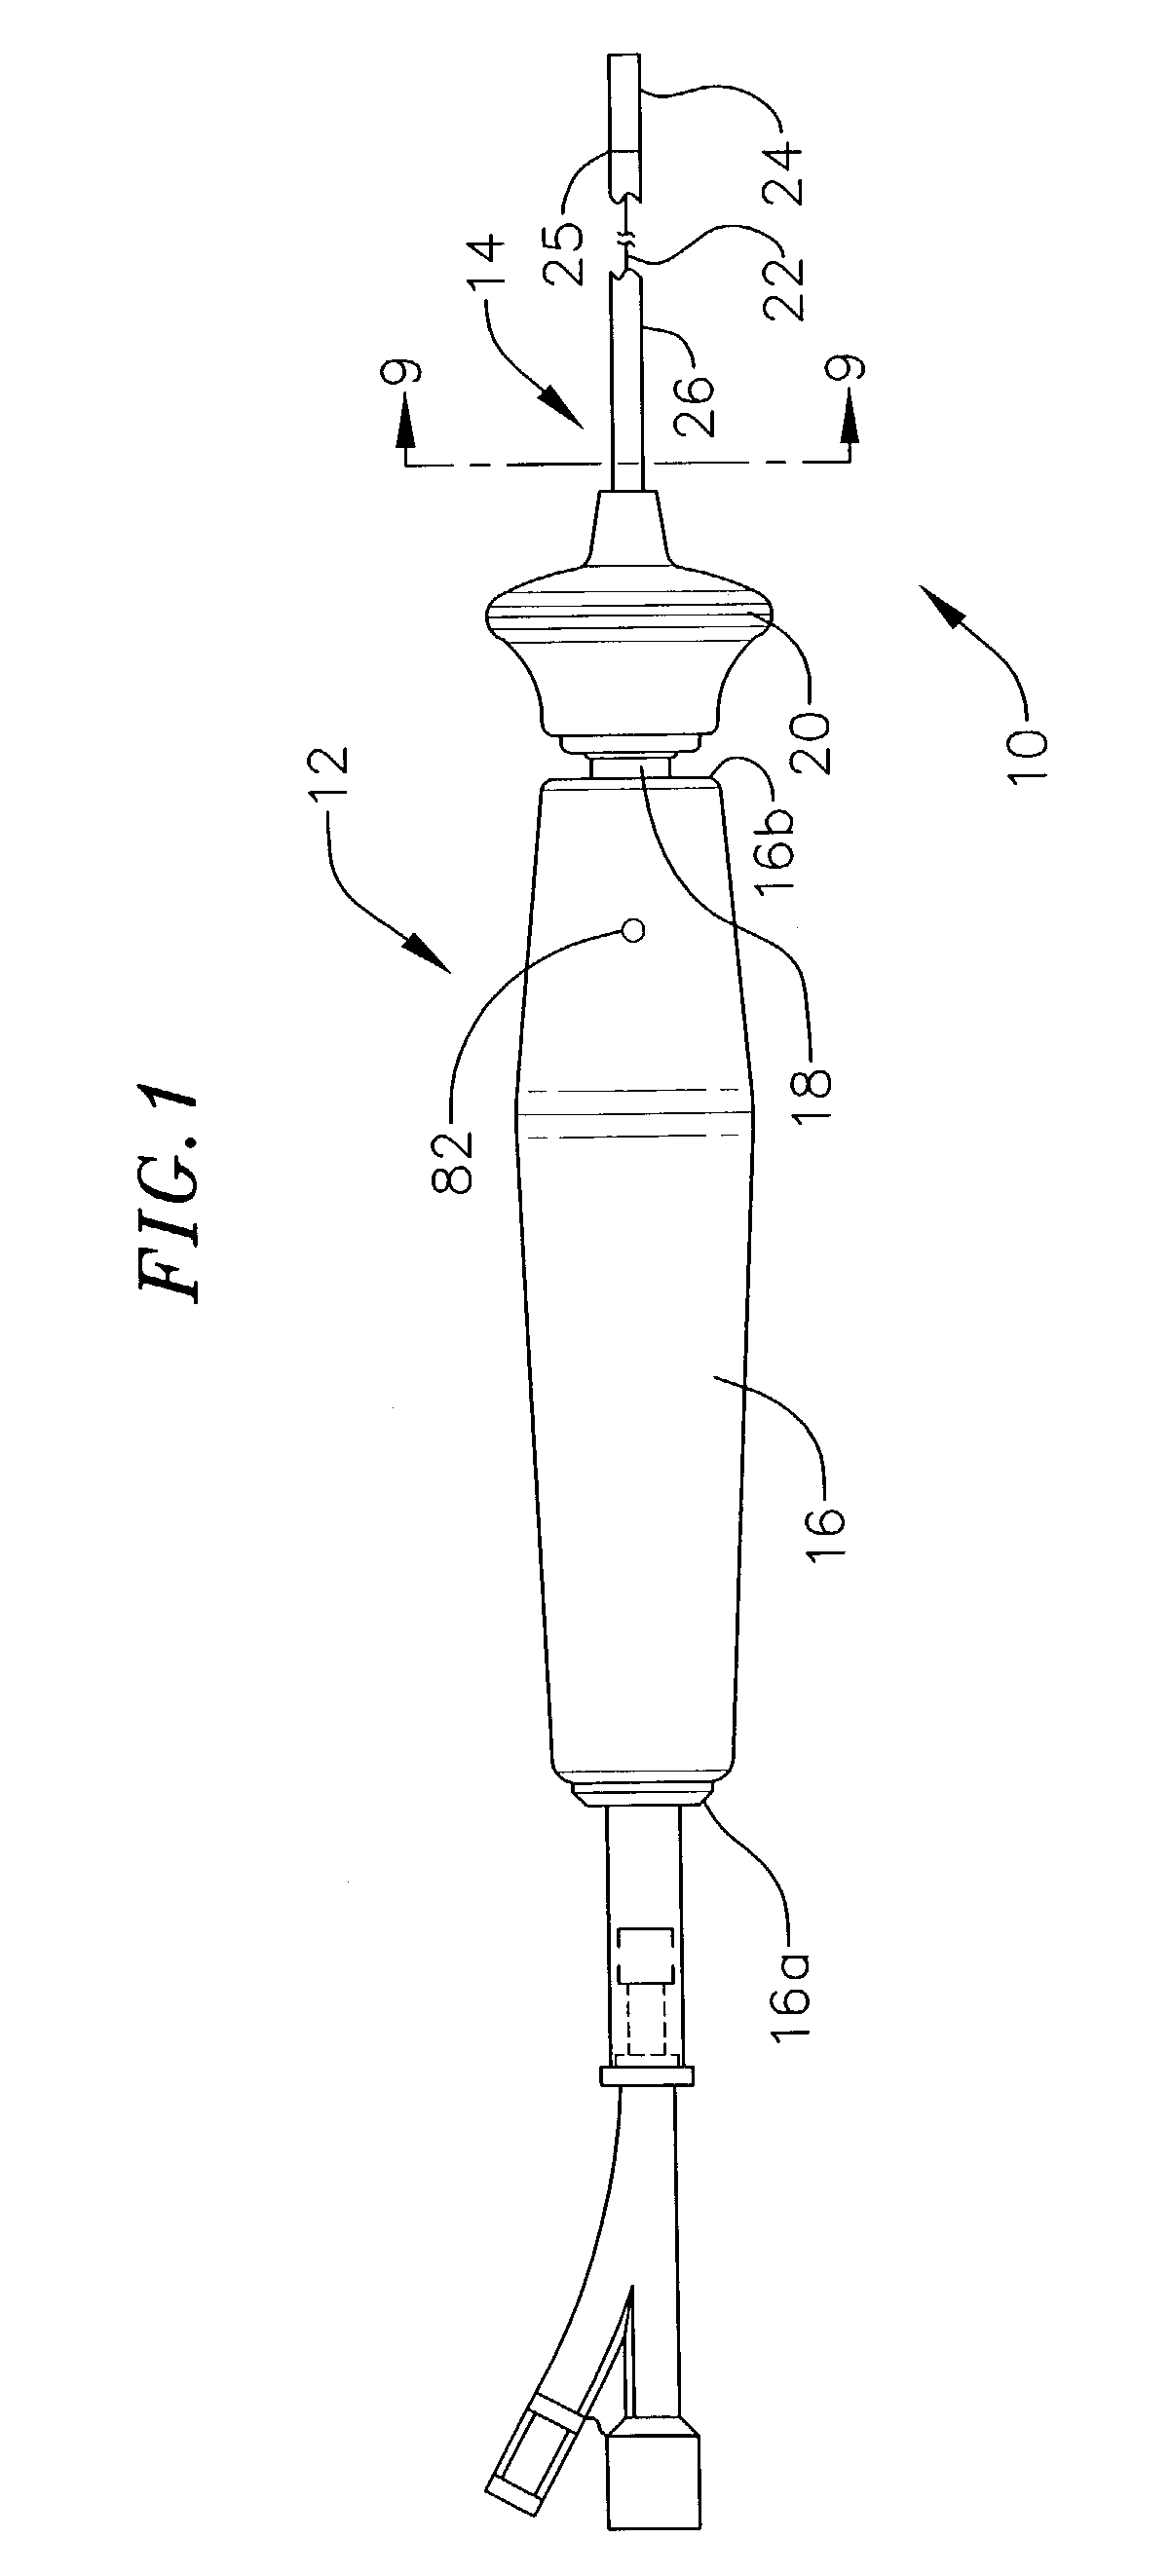 Steerable device for introducing diagnostic and therapeutic apparatus into the body